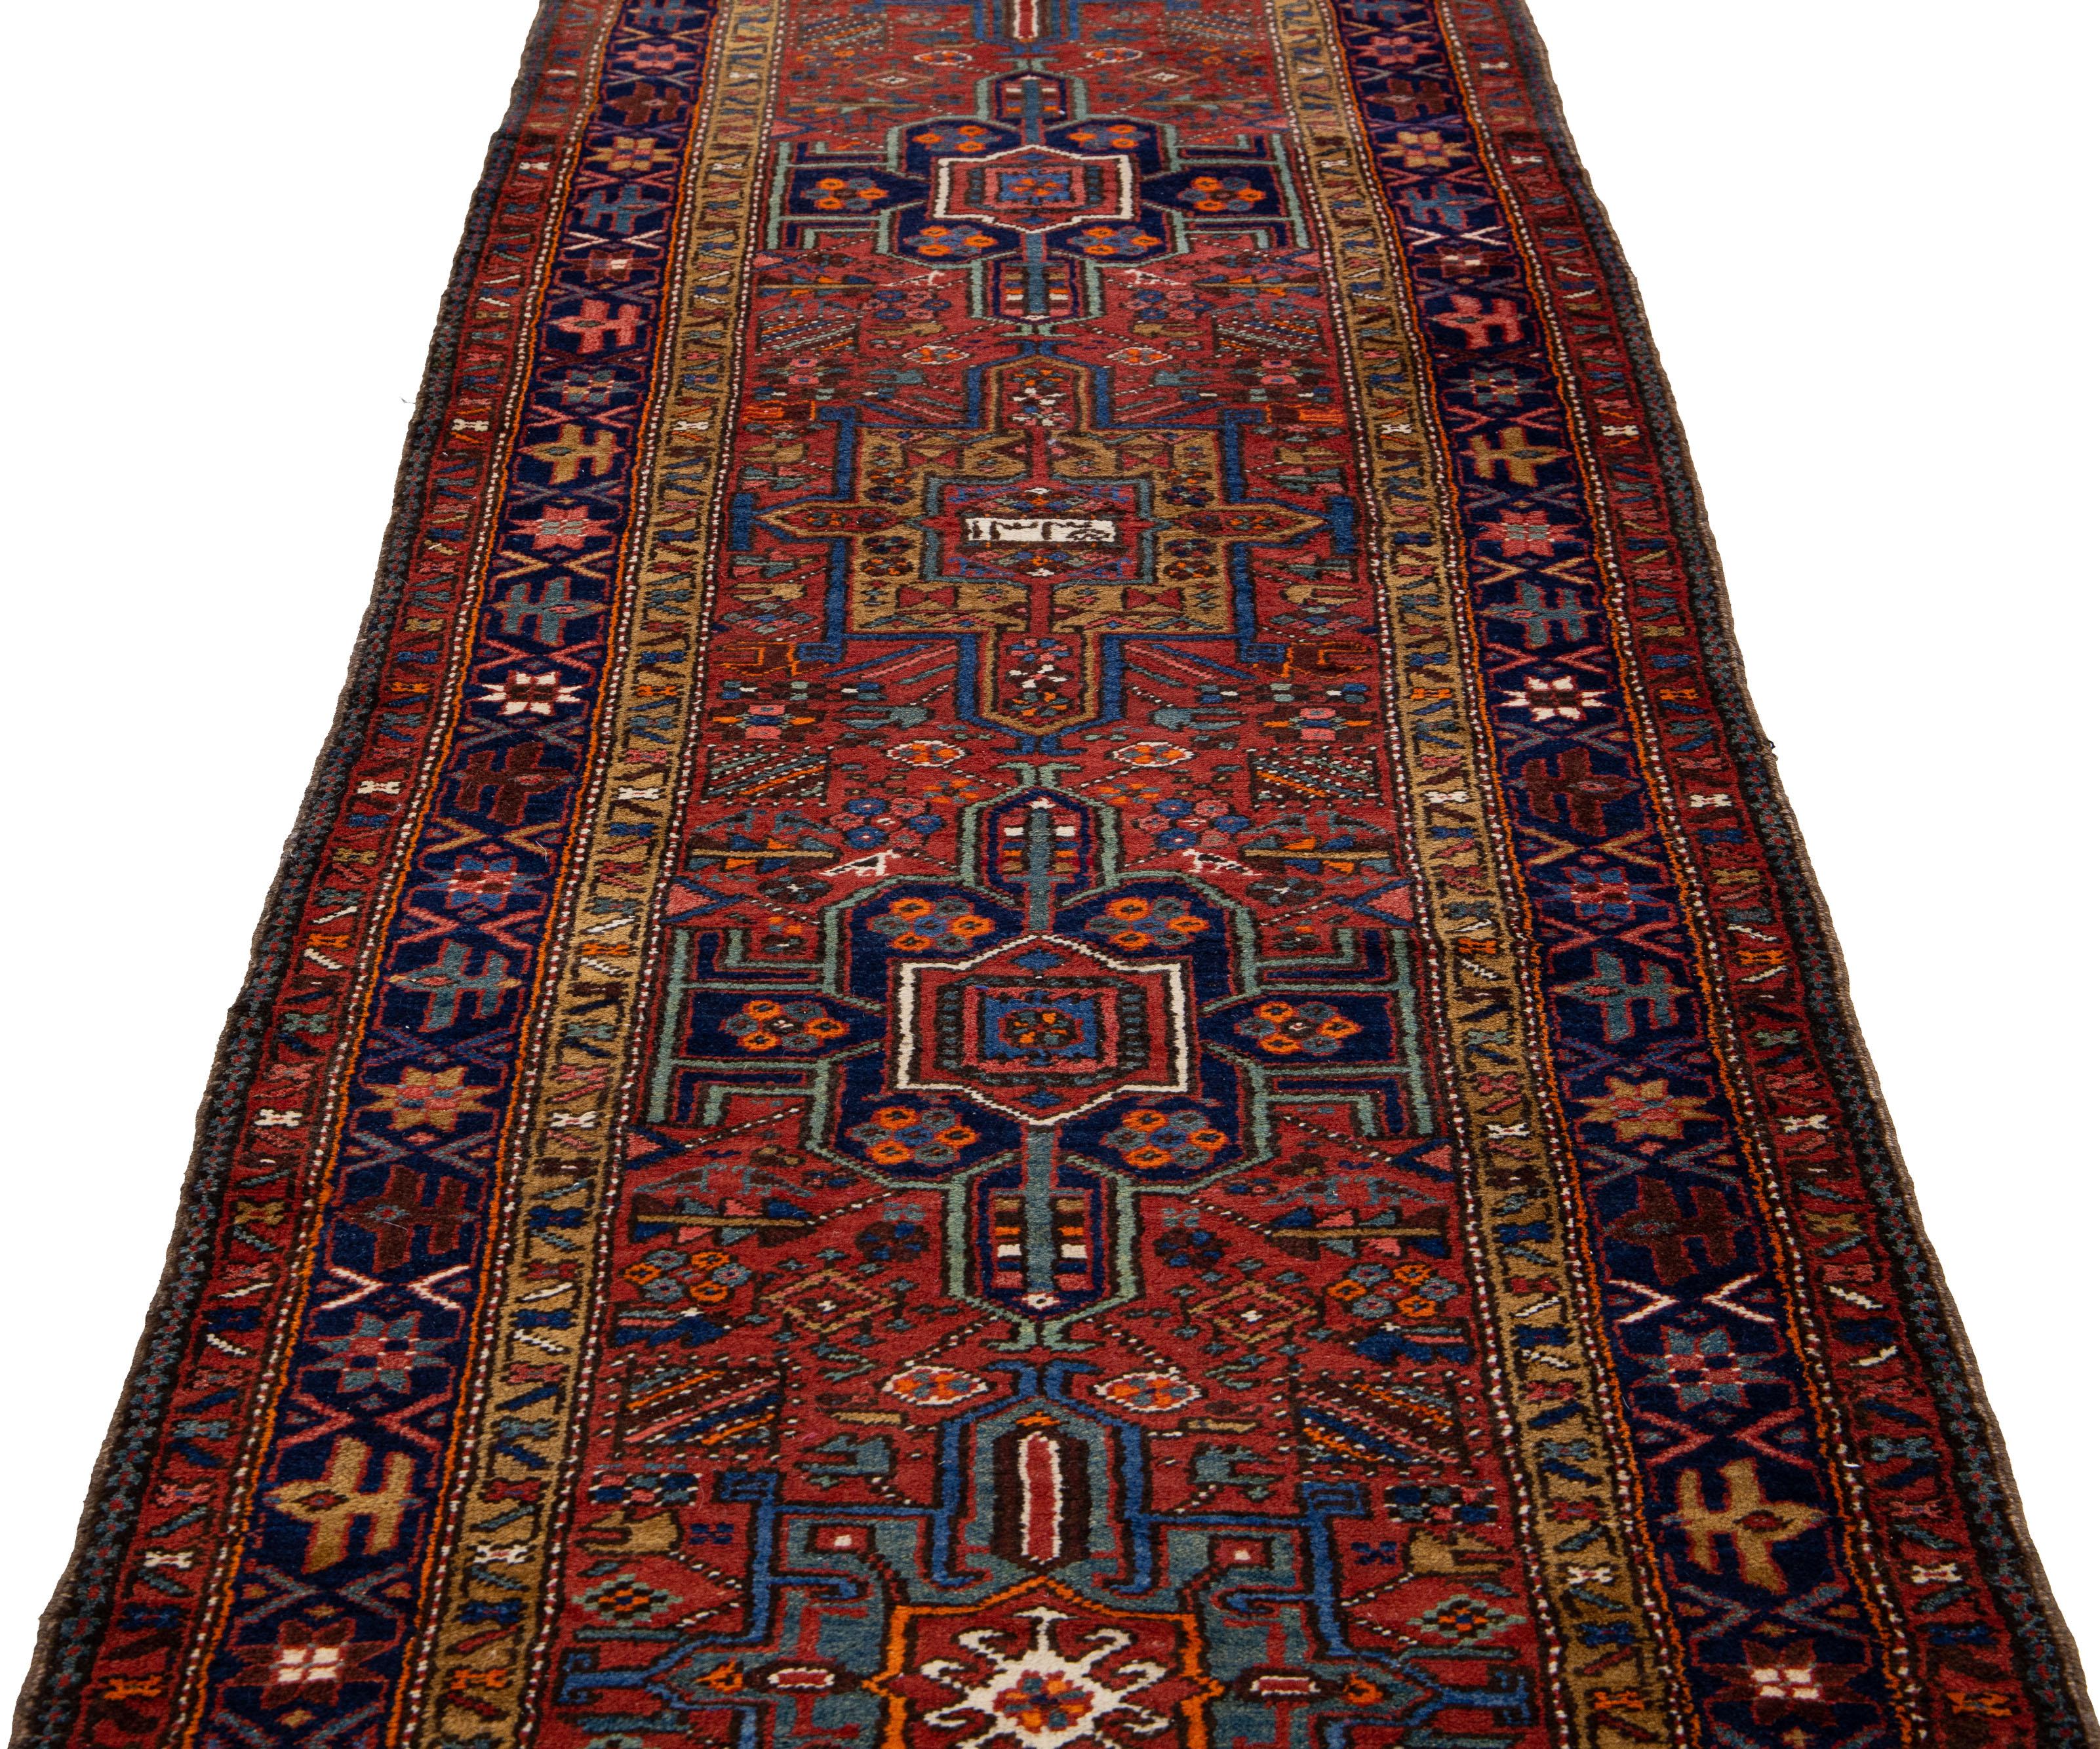 Beautiful vintage Karajah hand-knotted Wool rug with a rust color field. This Kalajah rug has multi-color accents in a gorgeous all-over geometric design.

This rug measures: 3'7